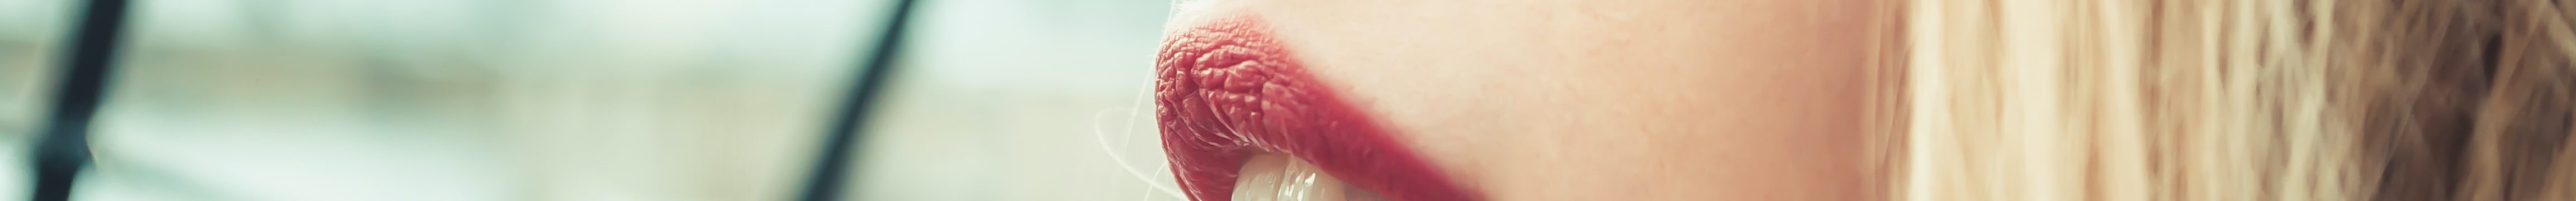 tips for getting soft lips 1